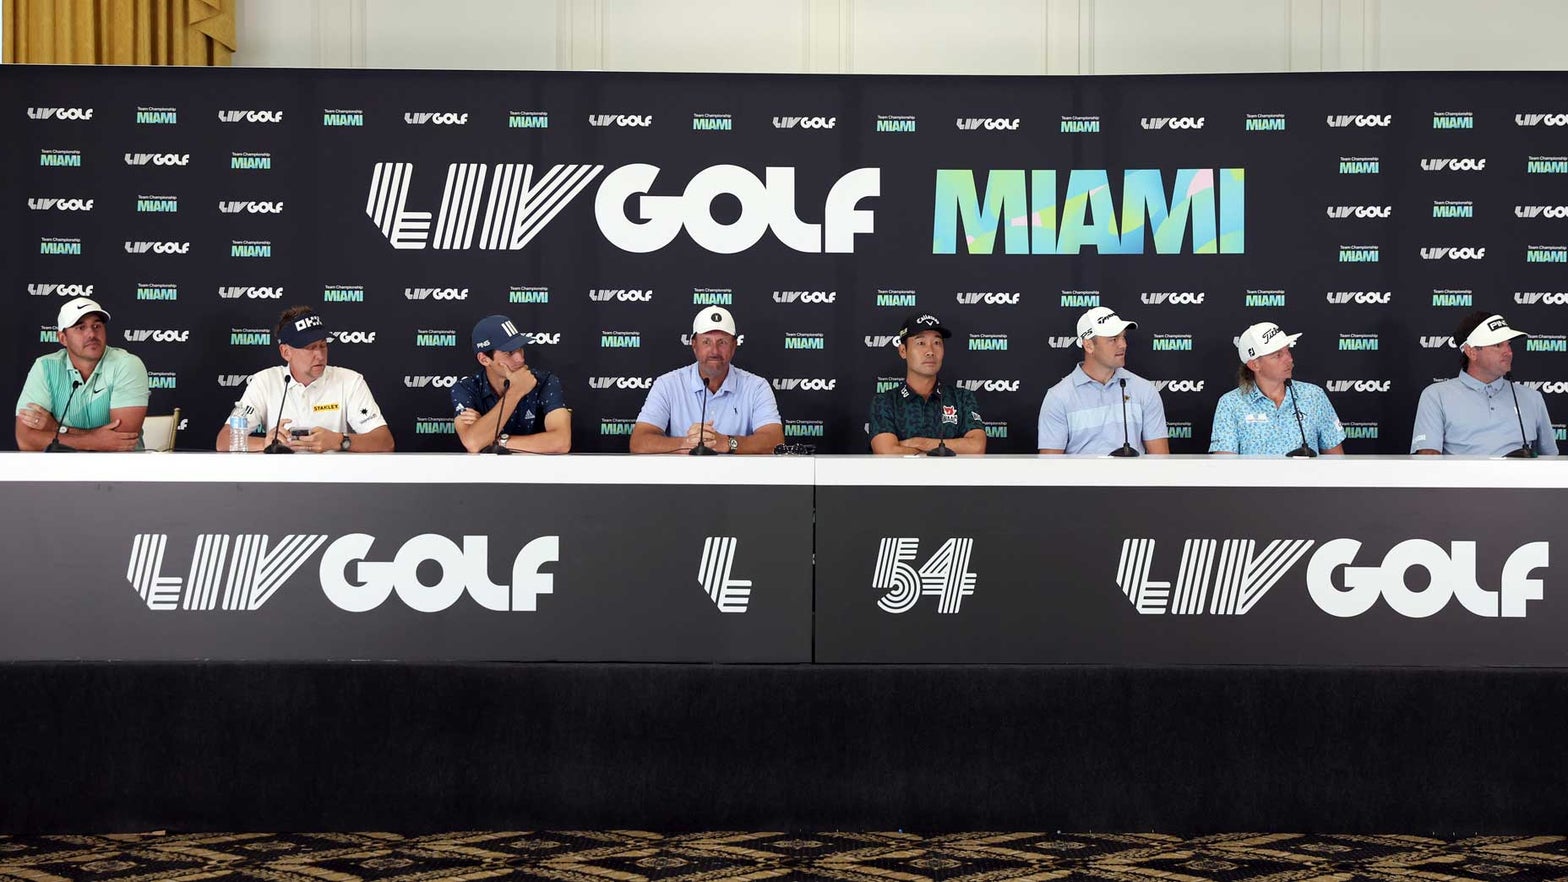 LIV Golf's 50 million team championship is here. This is what it looks